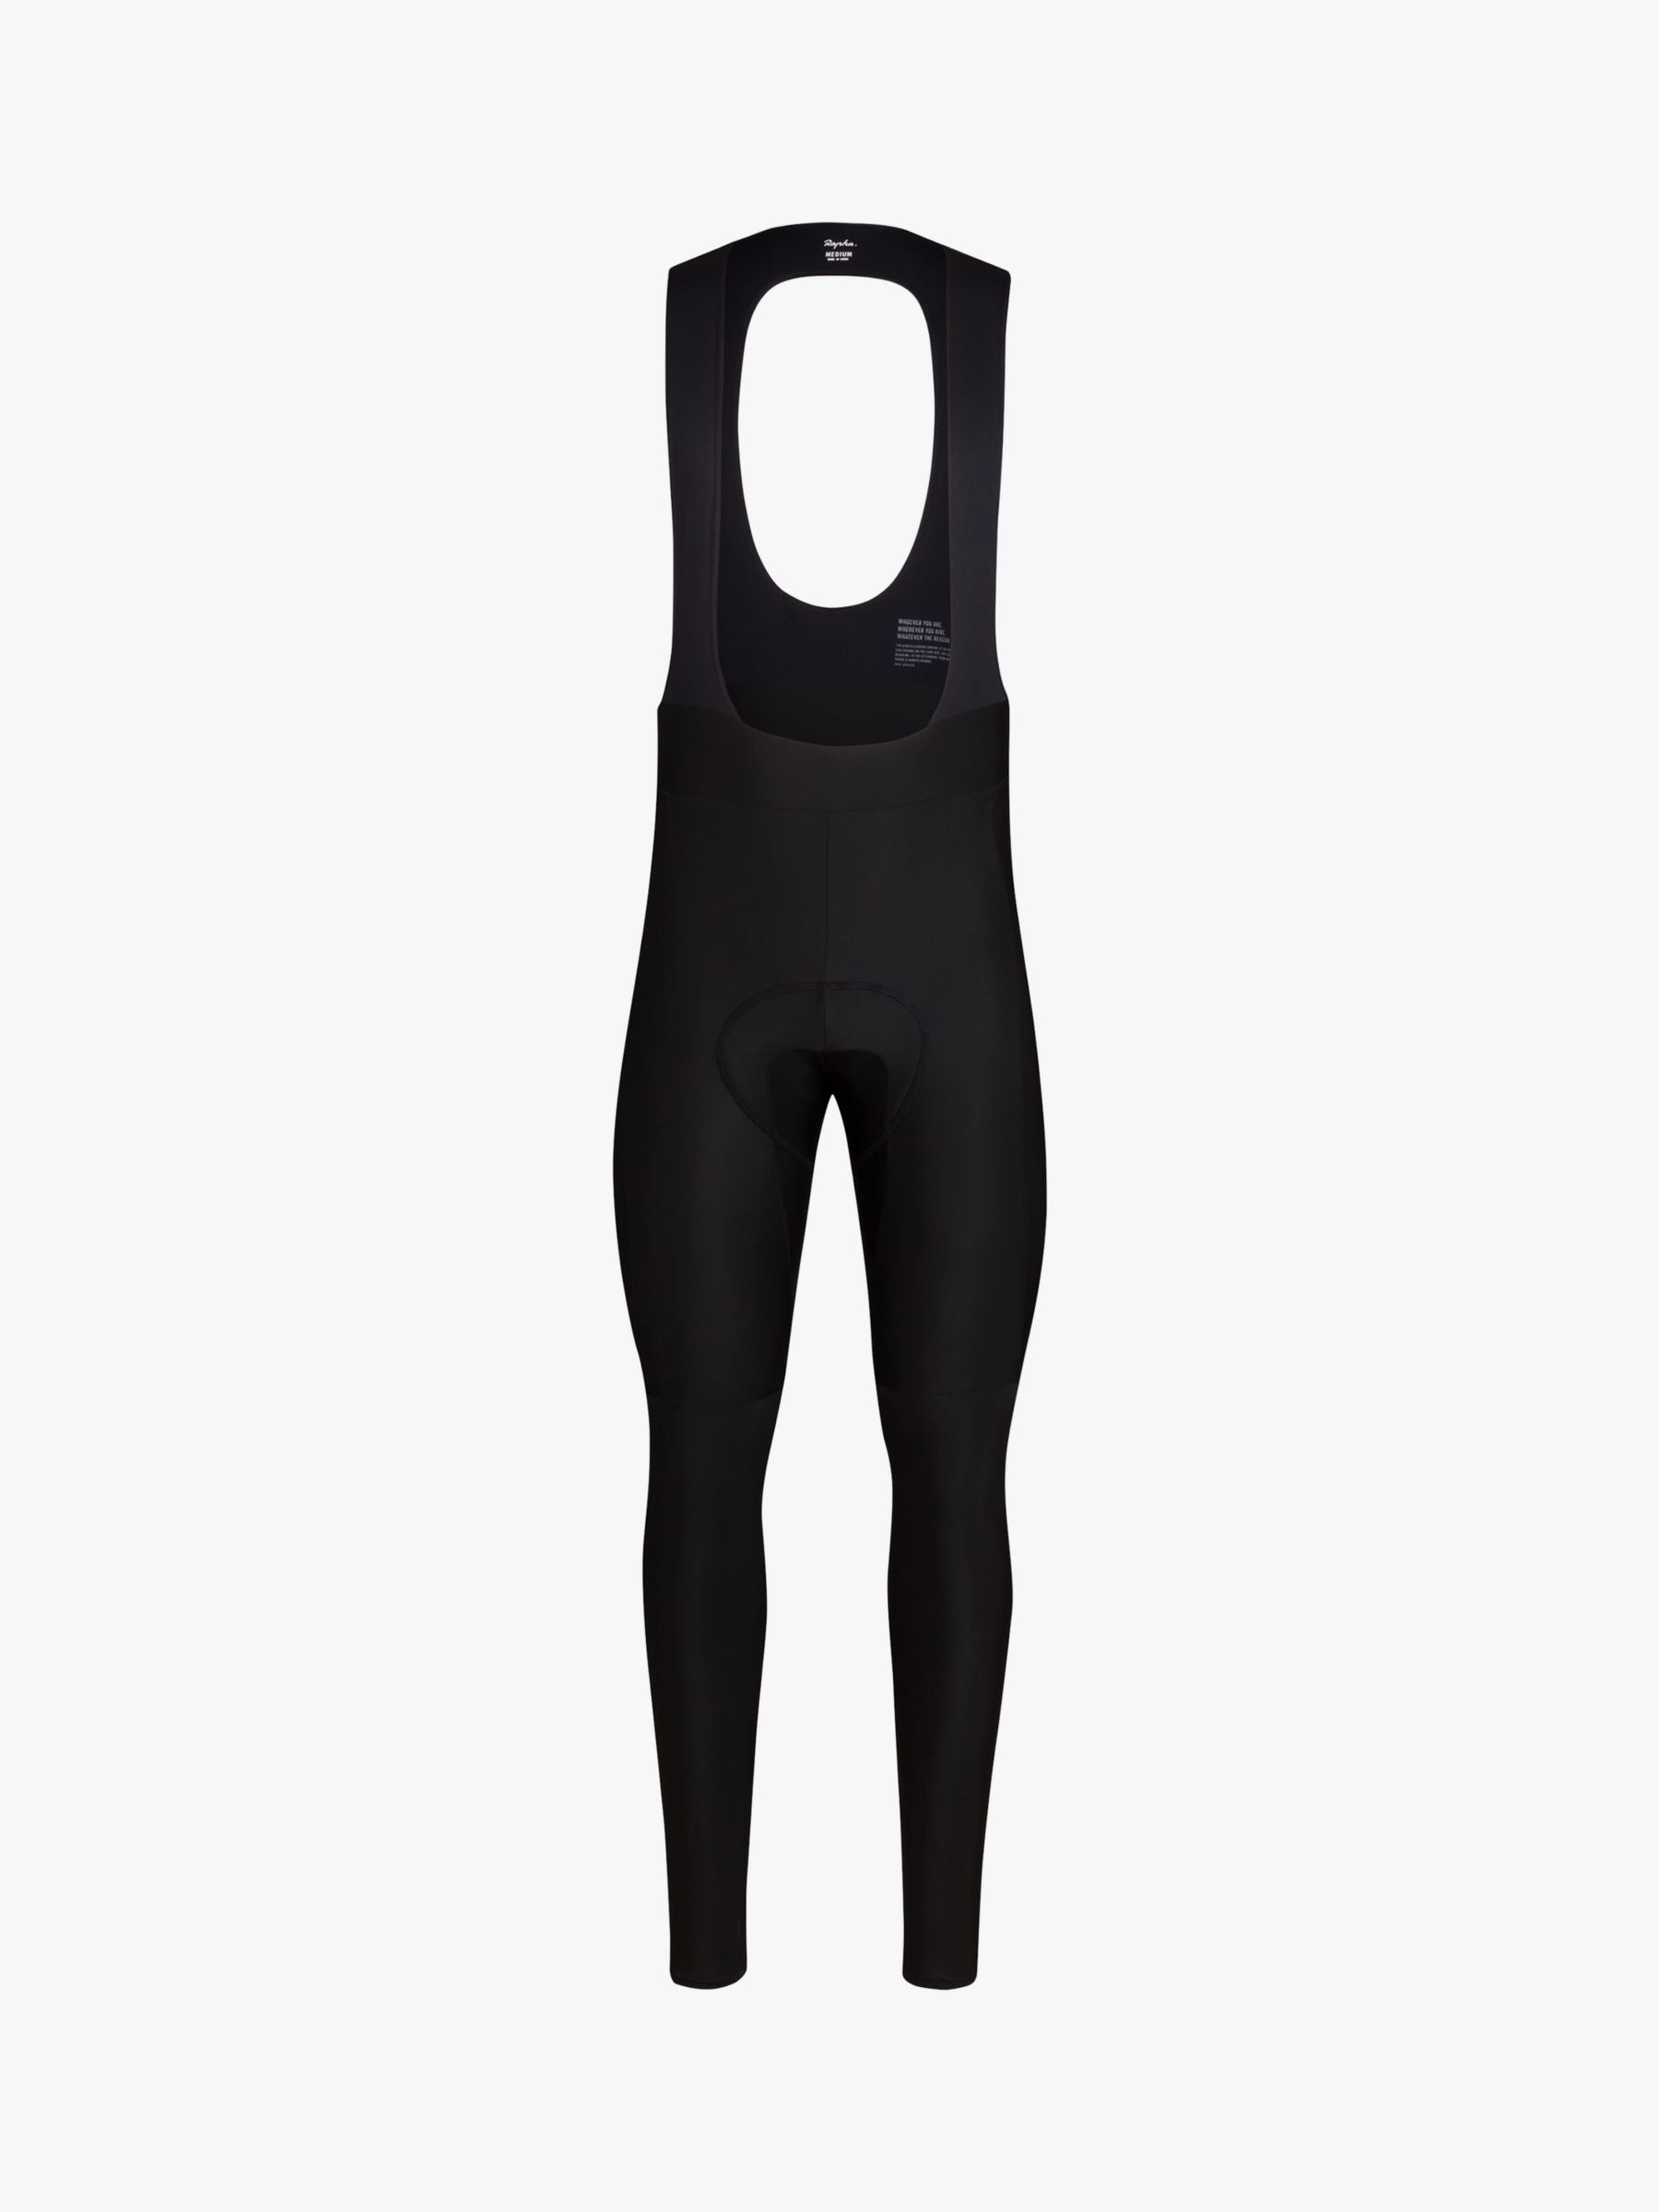 Rapha Core Winter Tights with Pad - Black